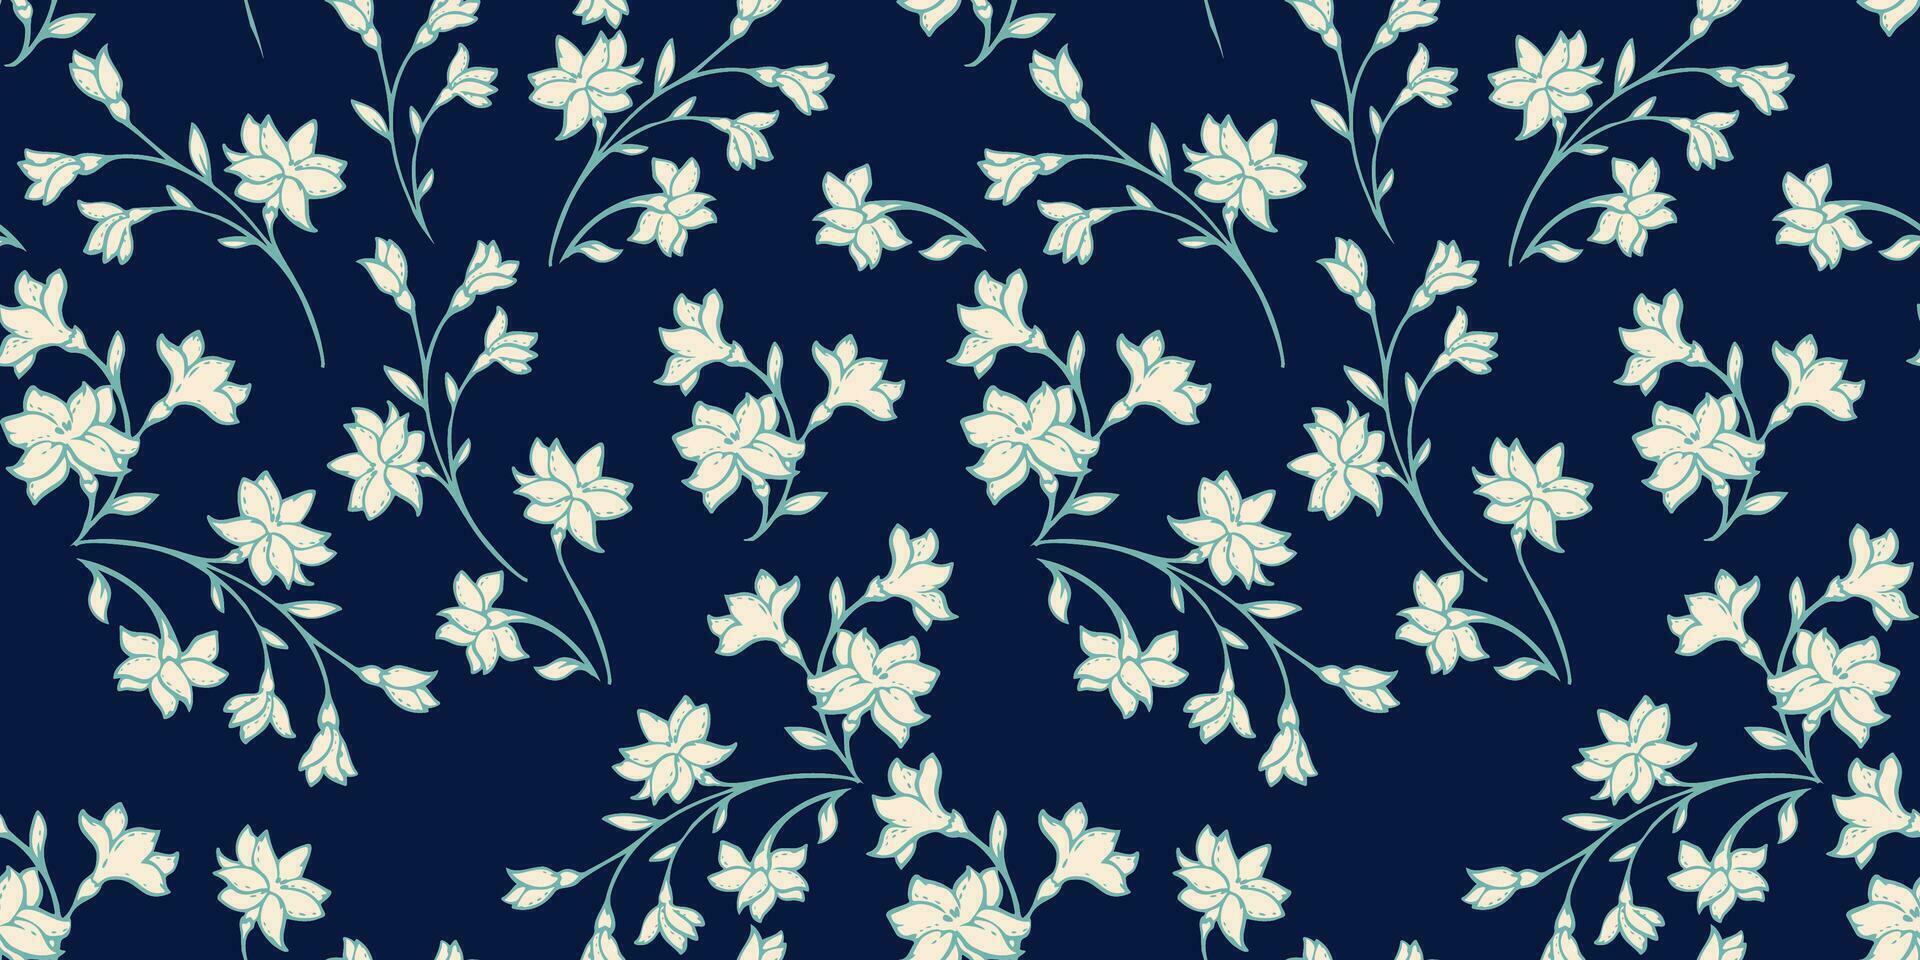 Gentle wild branches with tiny flowers seamless pattern. Vector hand drawn sketch. Simple floral silhouettes on a dark blue background. Template for design, fashion, print